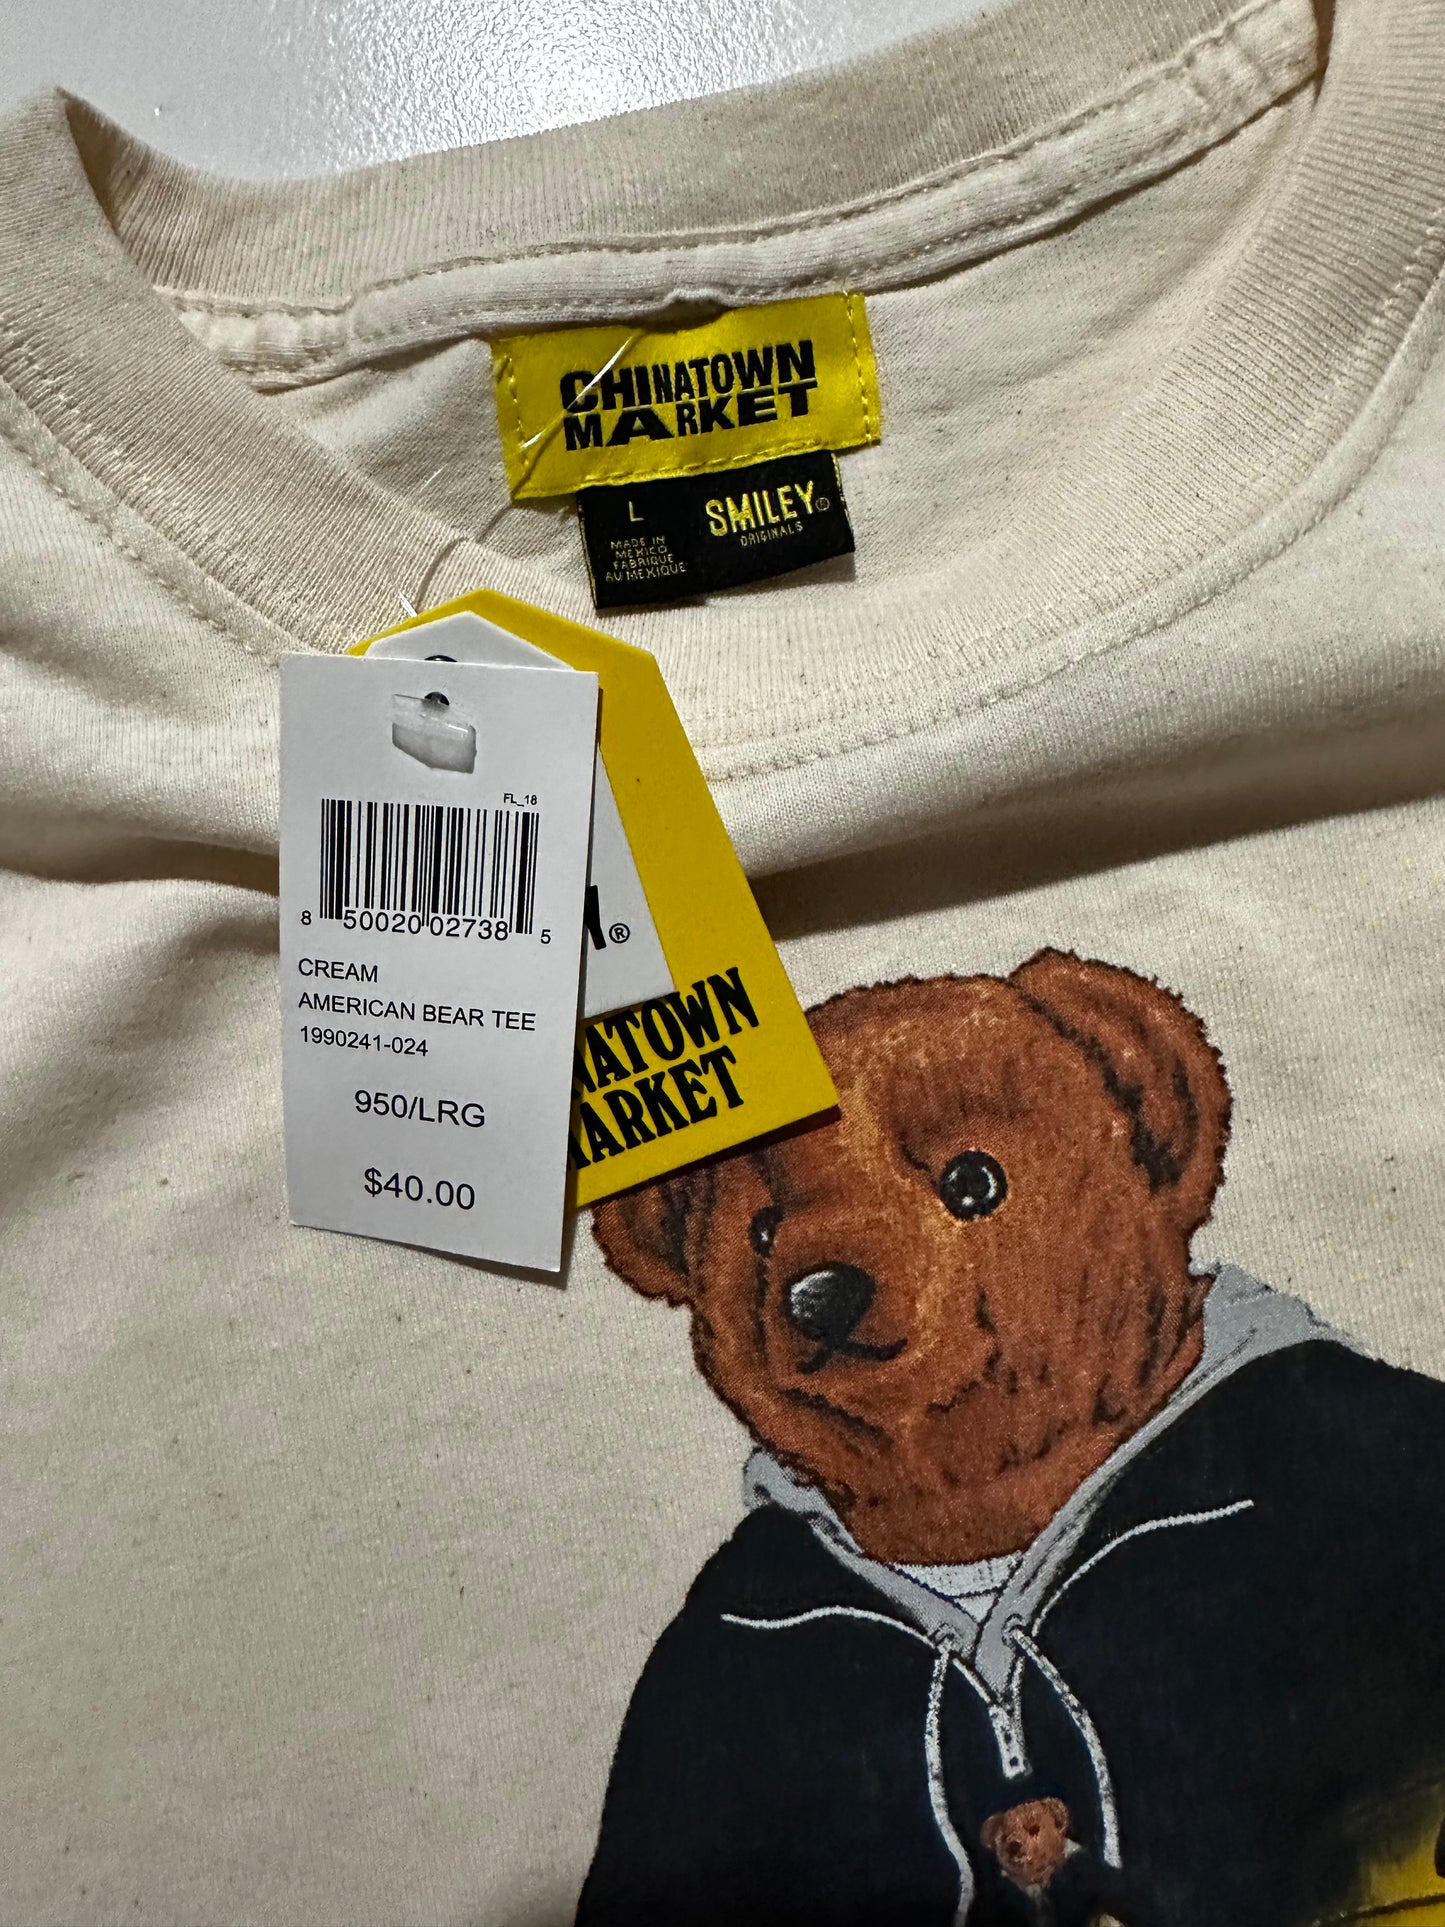 CTM Smiley Collection “American Bear”